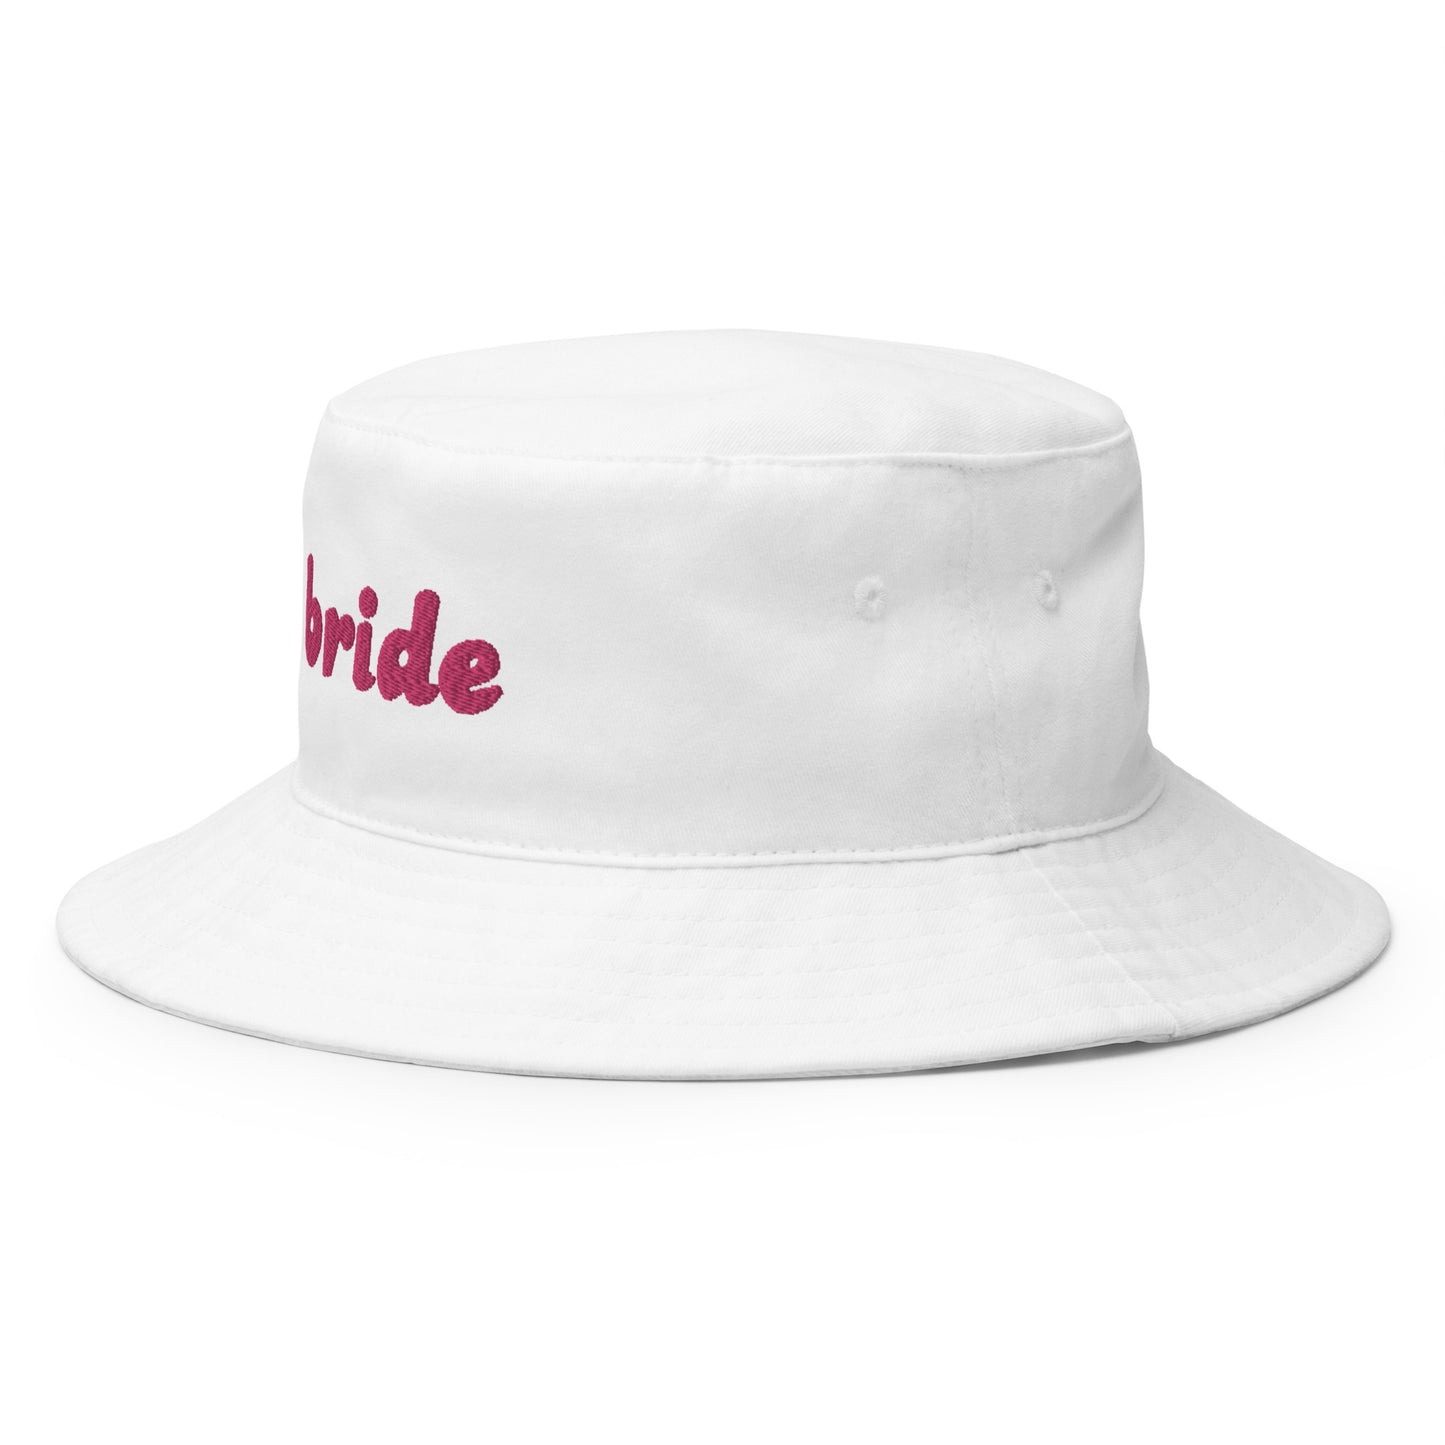 Bridal | Bucket Hat | Embroidered